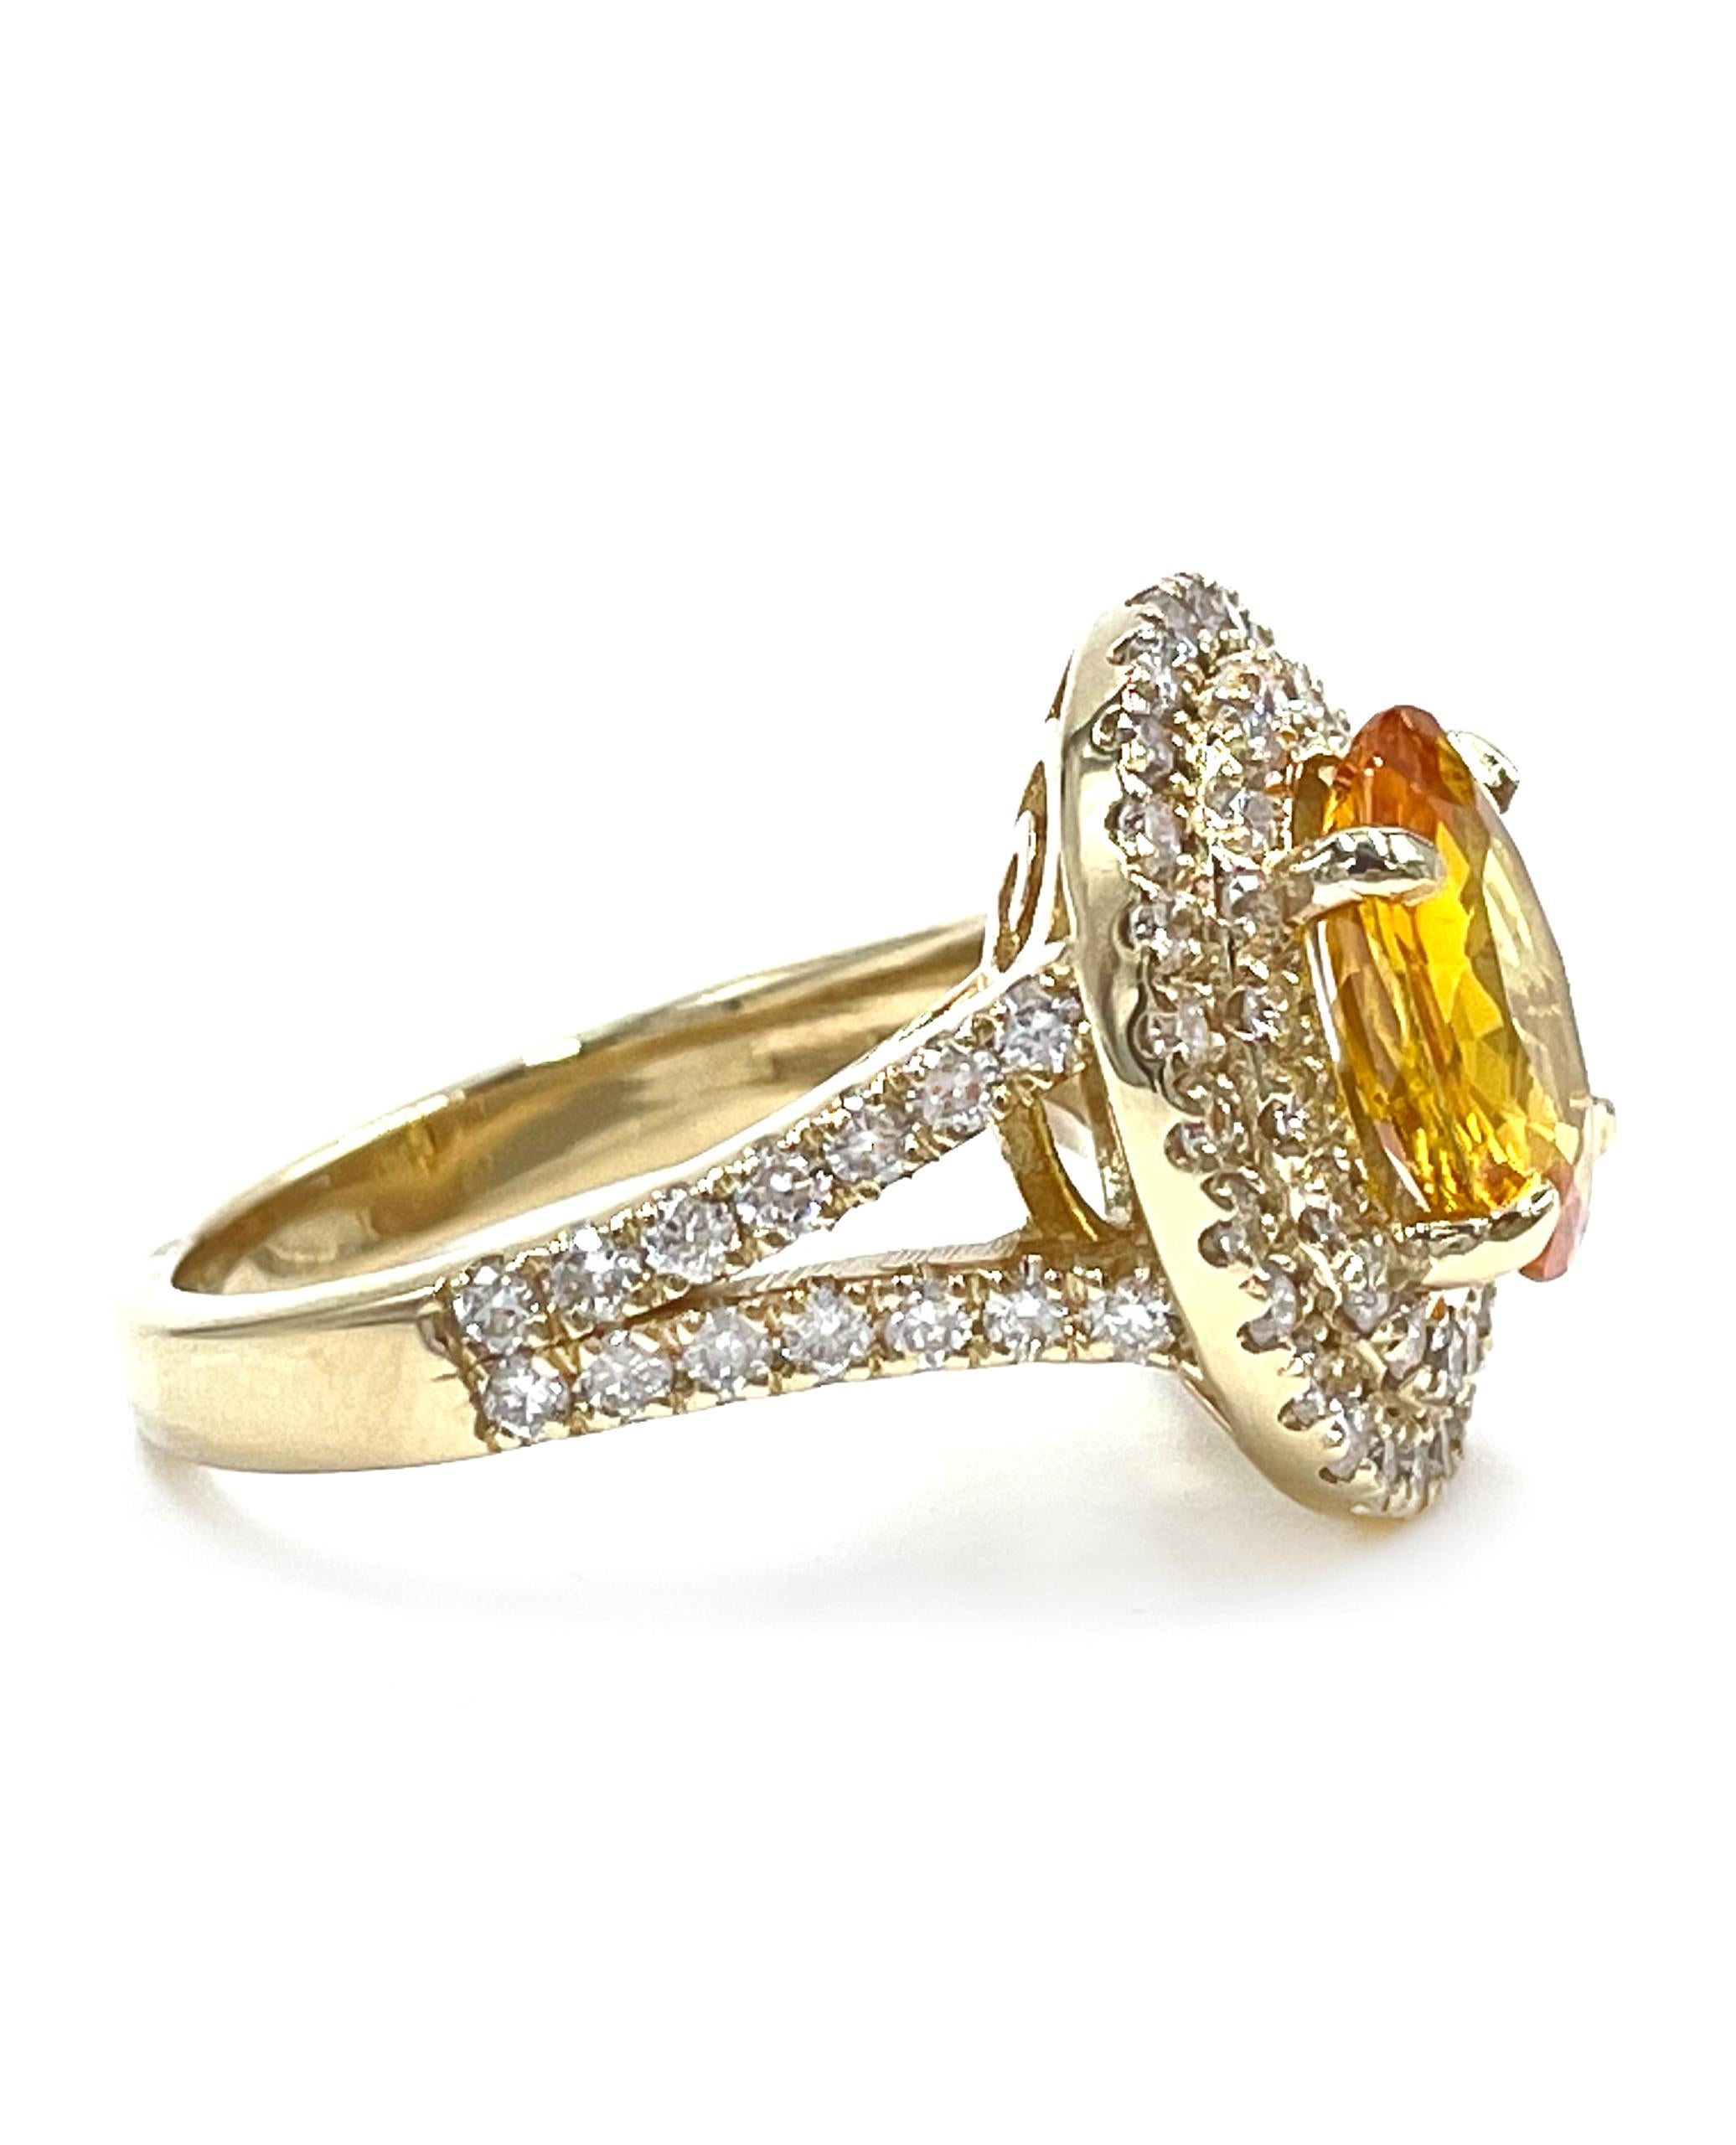 14K yellow gold double halo, split shank ring furnished with 75 round faceted diamonds weighing 1.50 carats total. In the center there is one oval shape yellow sapphire weighing 2.40 carats.

* Finger size 6.75. Can be sized up or down 2 sizes.